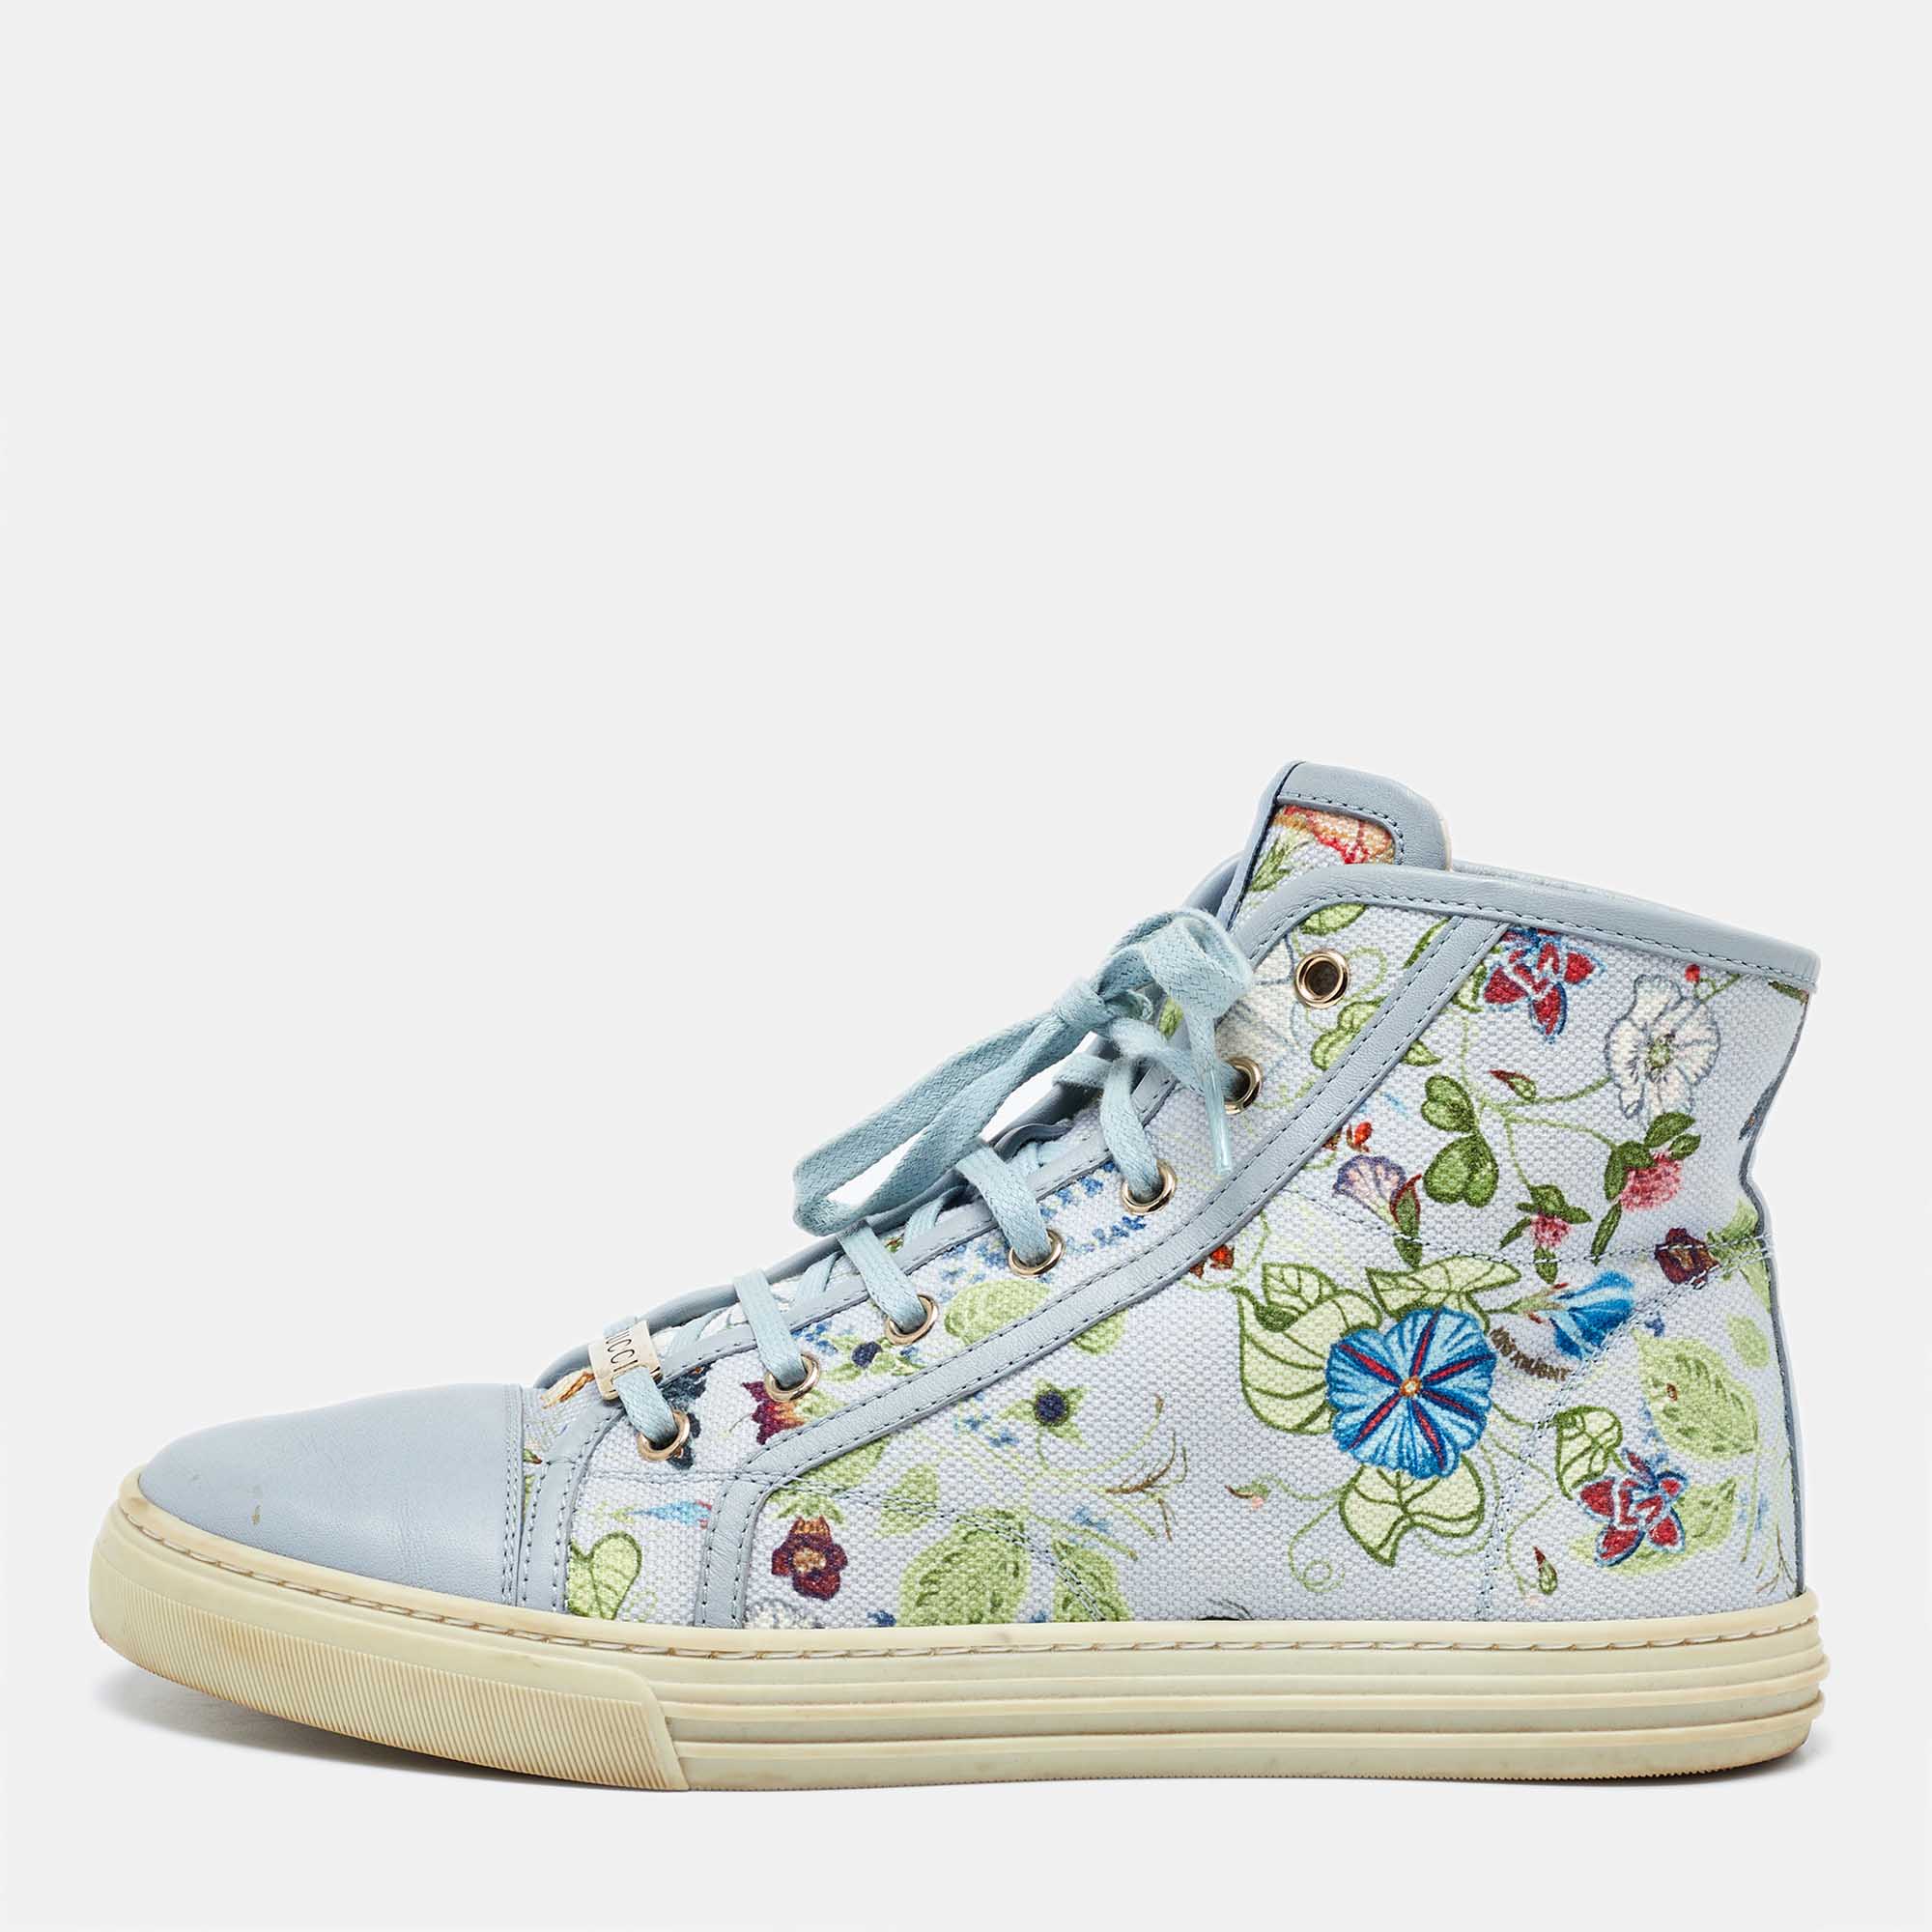 Gucci grey leather and floral print canvas high top sneakers size 39